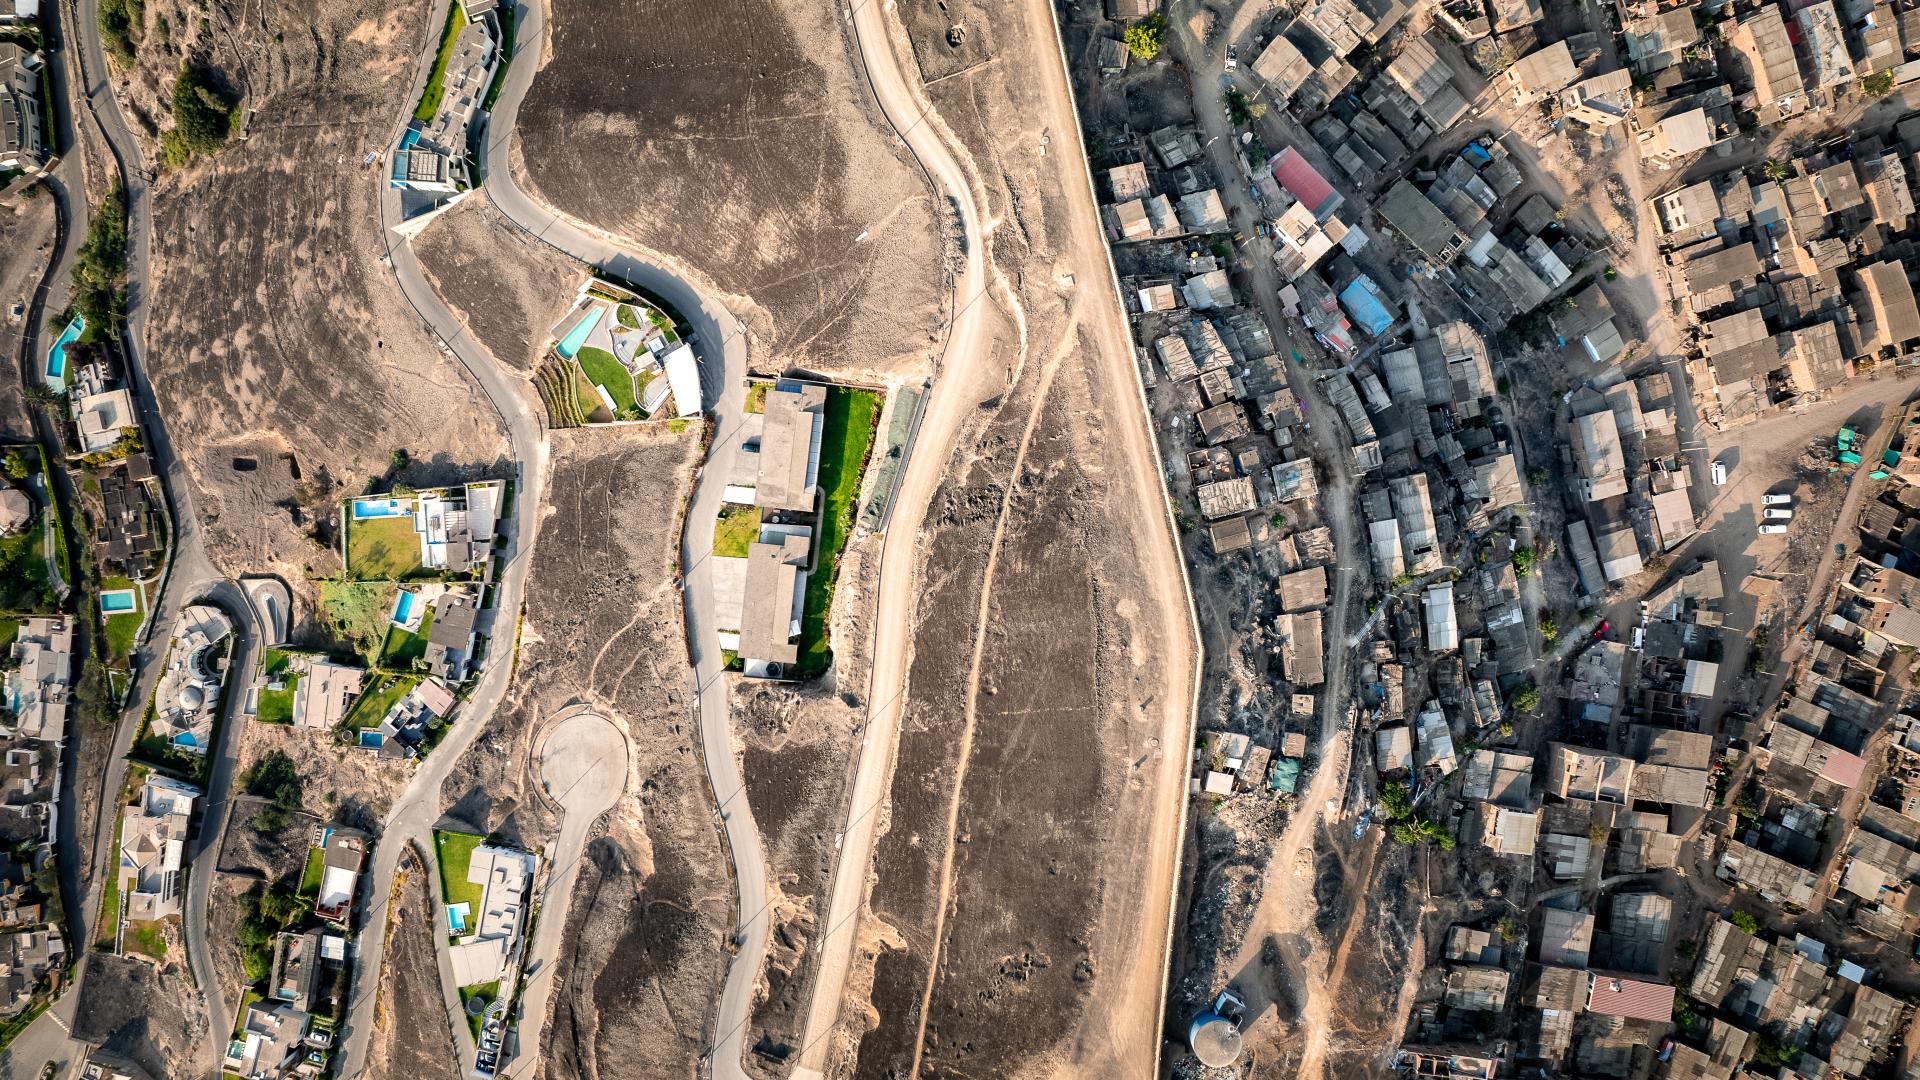 Aerial view of arid hill with mansions on left and low income housing on right